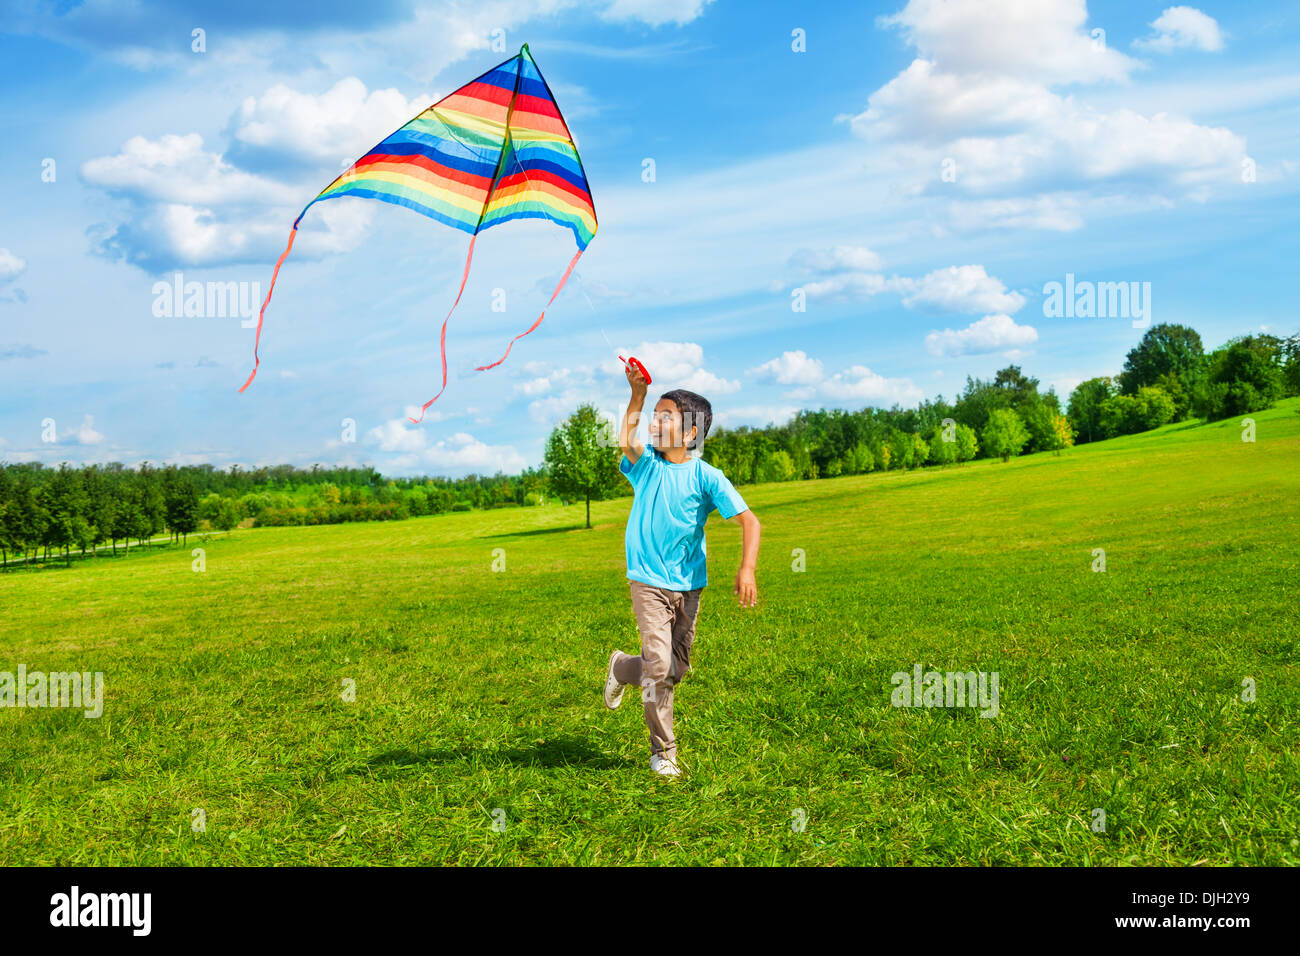 Little boy in blue shirt running with kite in the field on summer day in the park Stock Photo